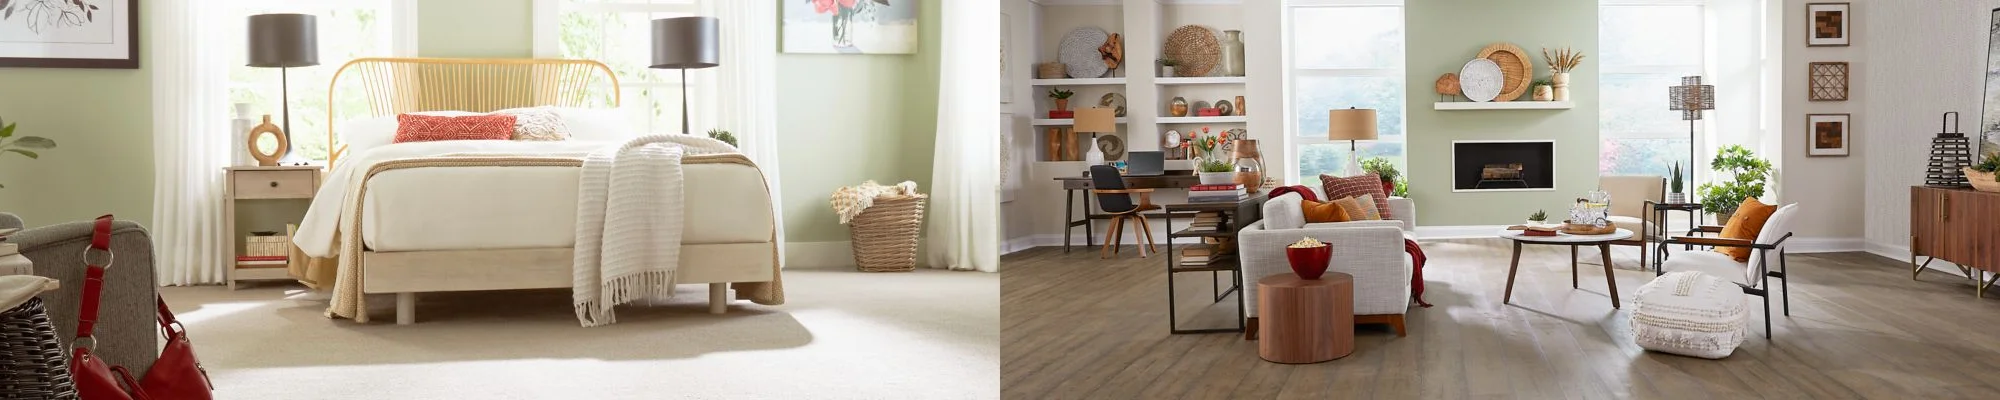 Discover when to choose carpet or hardwood flooring for an interior design